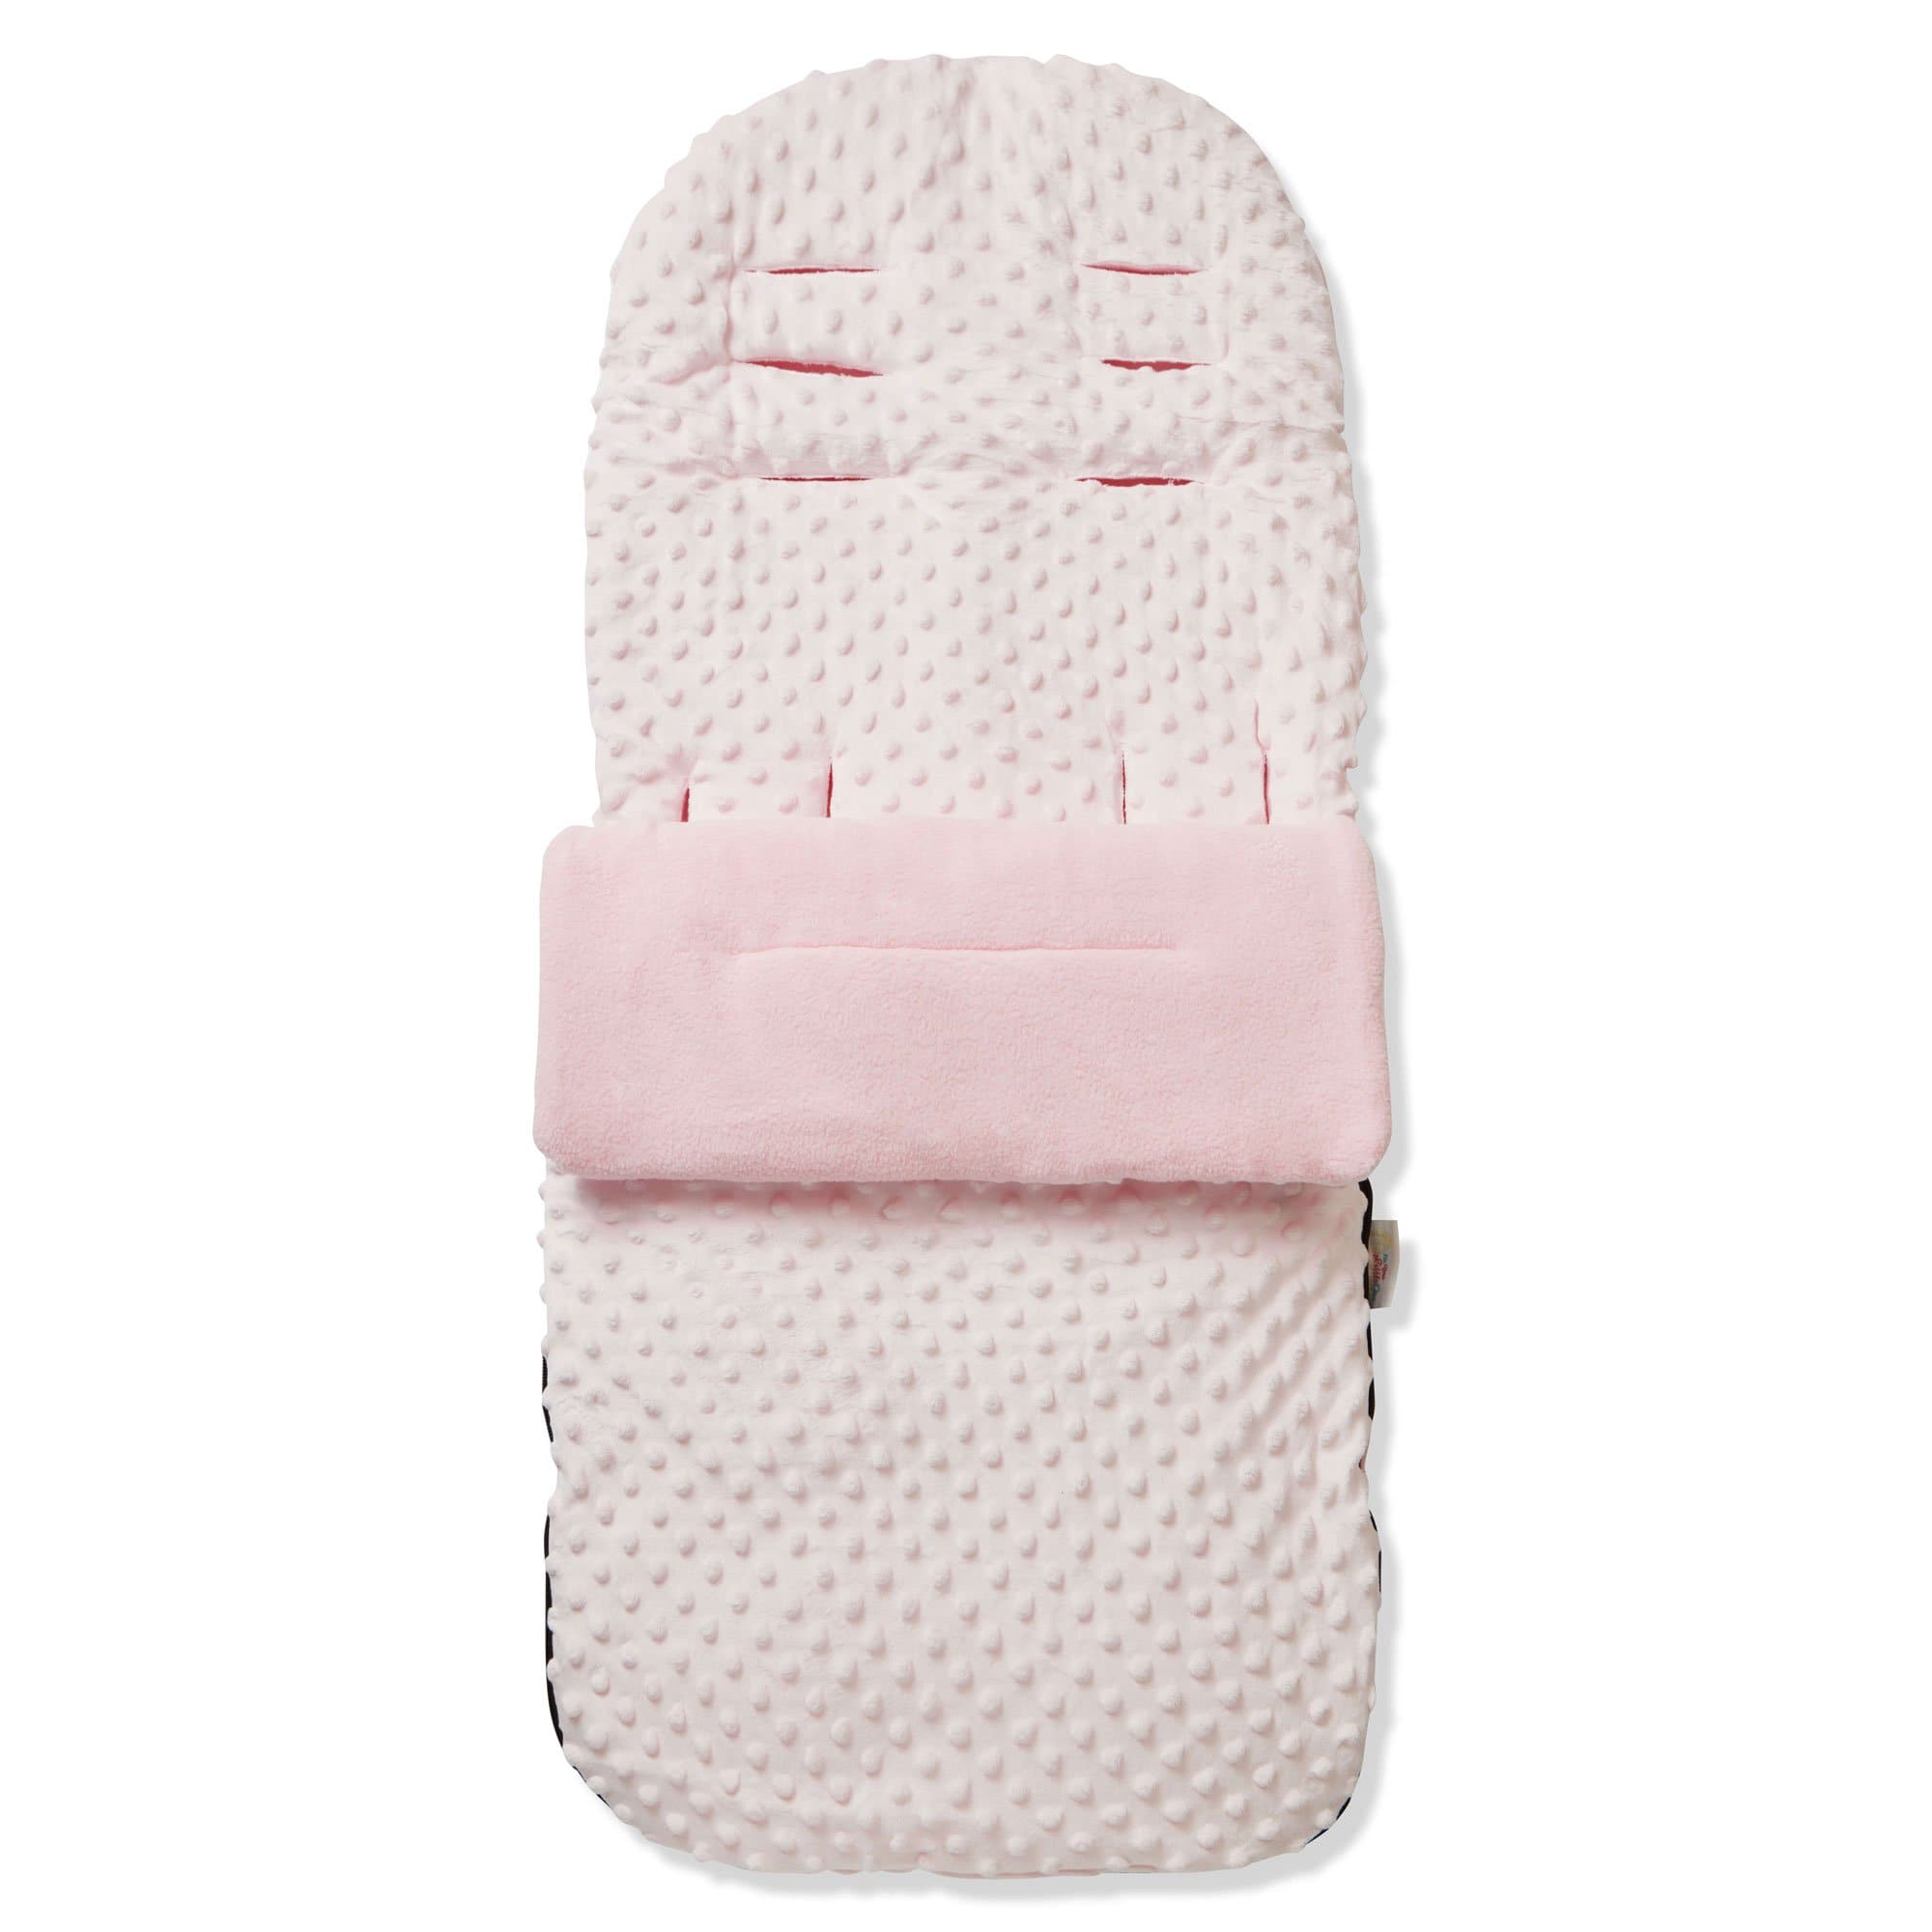 Dimple Footmuff / Cosy Toes Compatible with Casual - Pink / Fits All Models | For Your Little One